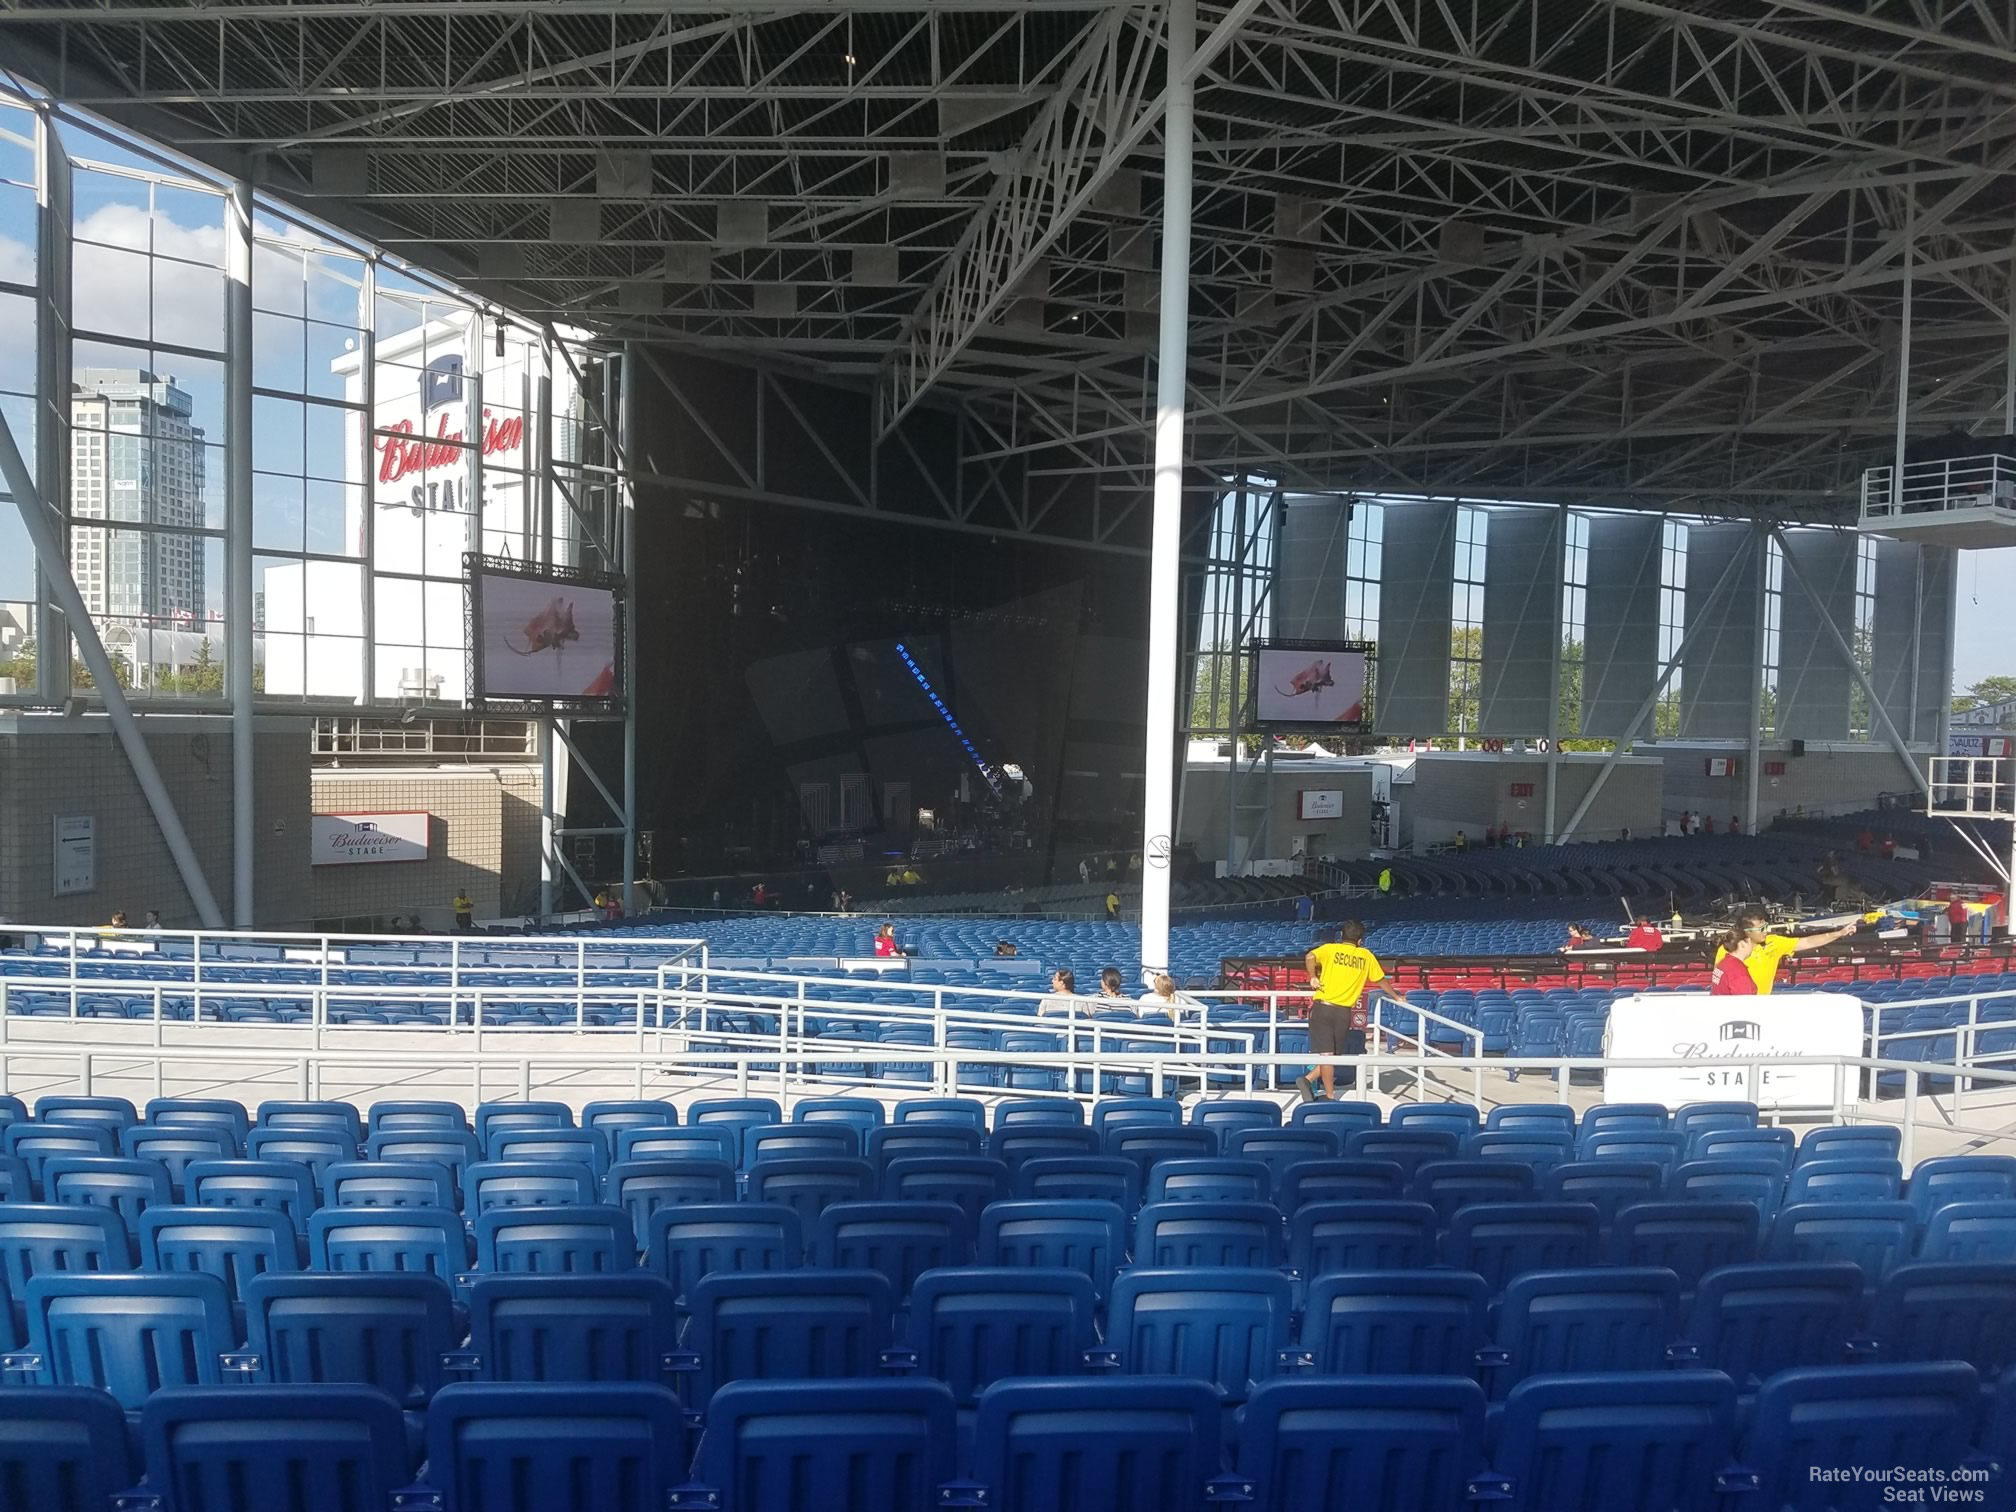 Section 409 at Budweiser Stage